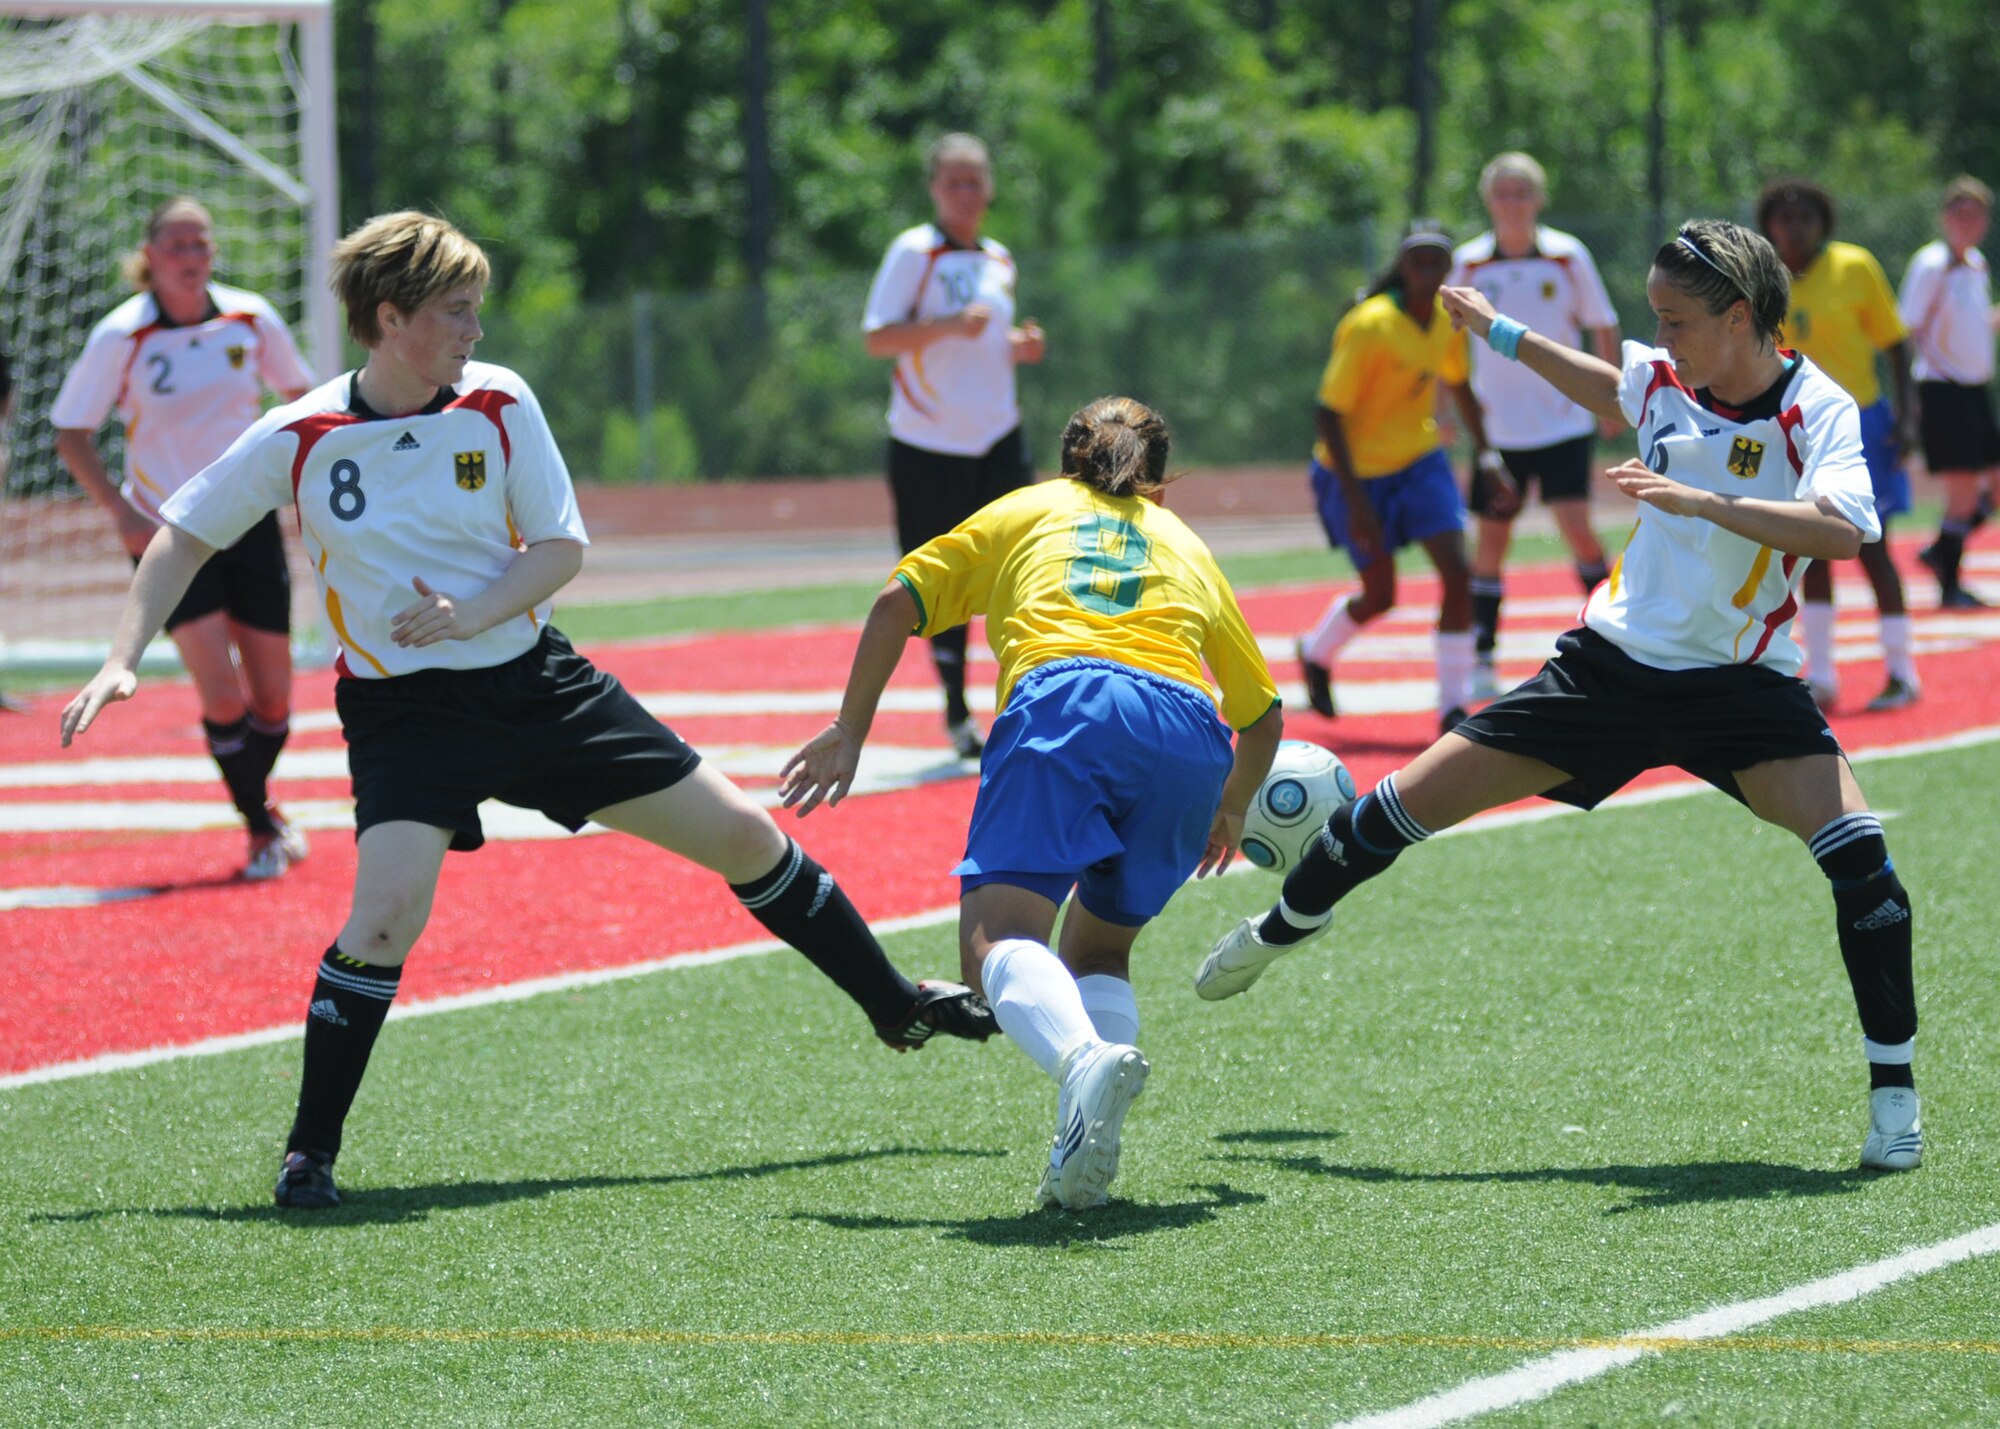 Germany and Brazil compete during the 5th CISM Women’s Soccer Championship at Biloxi High School Stadium 7 June.  The CISM tournament, hosted by Keesler Air Force Base, includes teams from Brazil, Canada, France, Germany, The Netherlands, The Republic of South Korea and the United States.  Matches are being held June 6 to 13, with the Gold match June 13 at 2 p.m.  Organizers say the tournament gives teams and people who attend a chance to develop bonds and life-long friendships between the countries and a chance to learn about one another’s cultural similarities and differences.  (U.S. Air Force photo by Kemberly Groue)